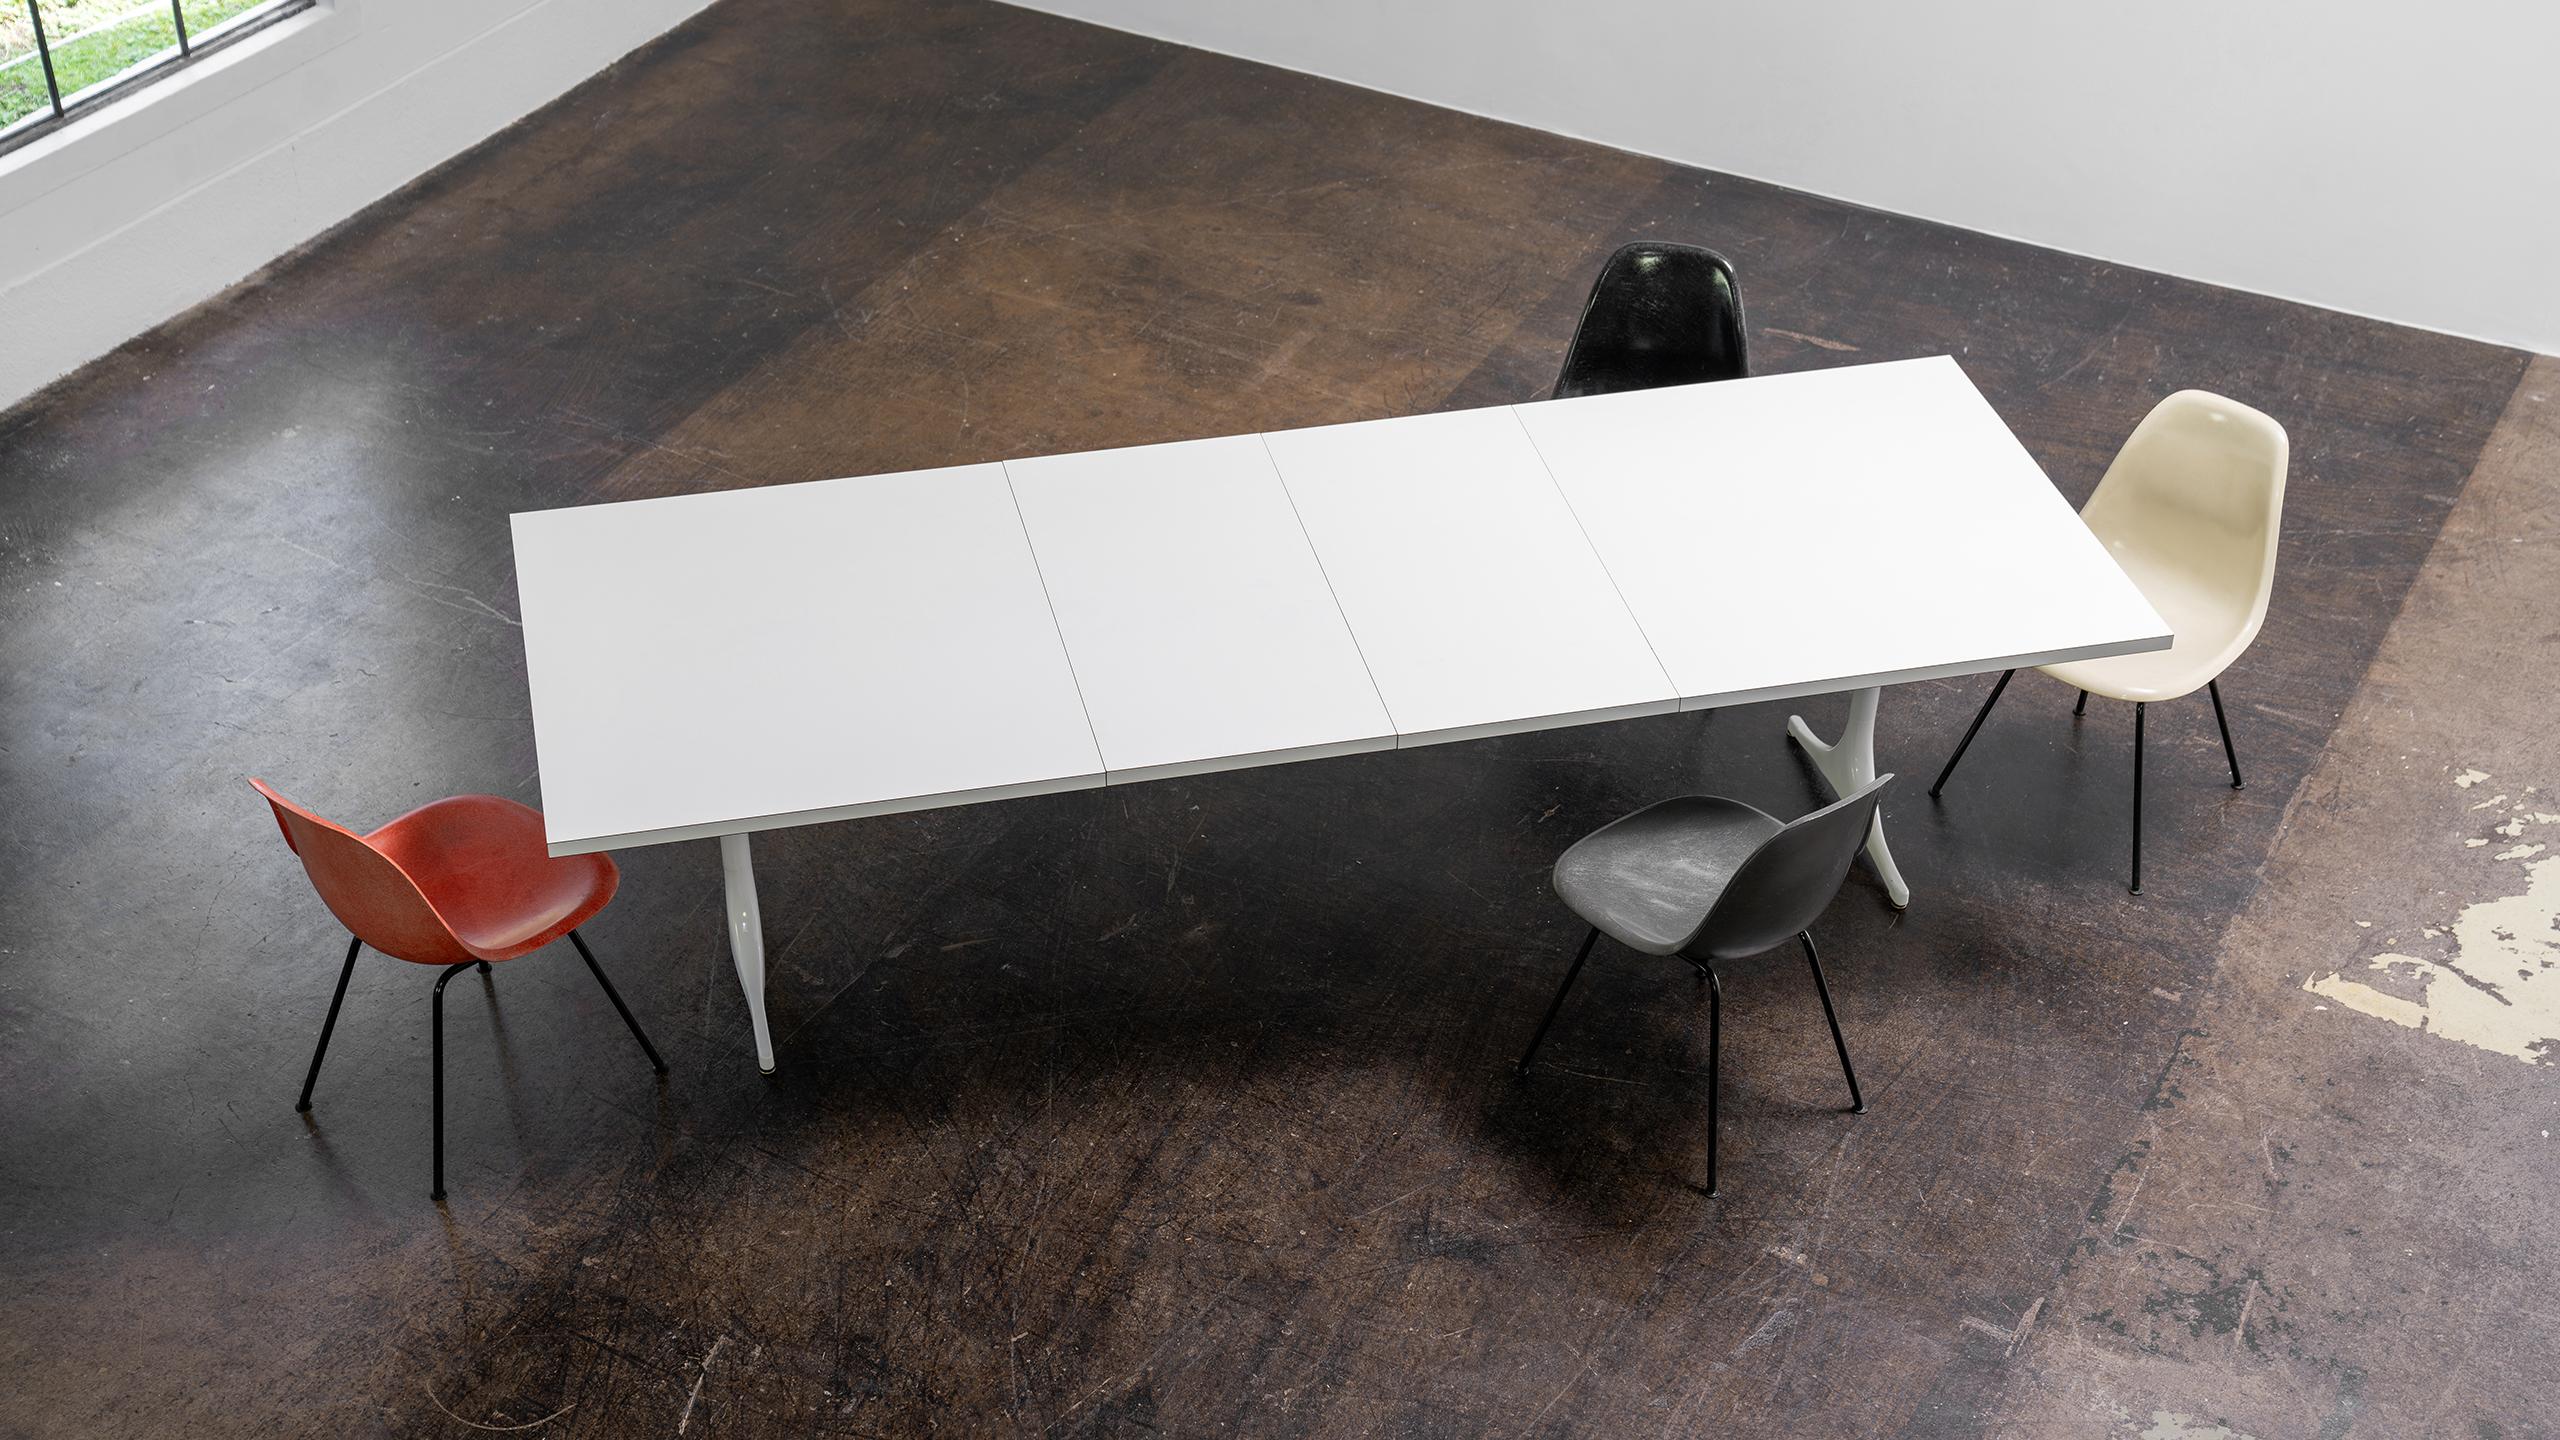 Mid-20th Century George Nelson - Pedestal Extension Dining Table, 1956 for Herman Miller, USA